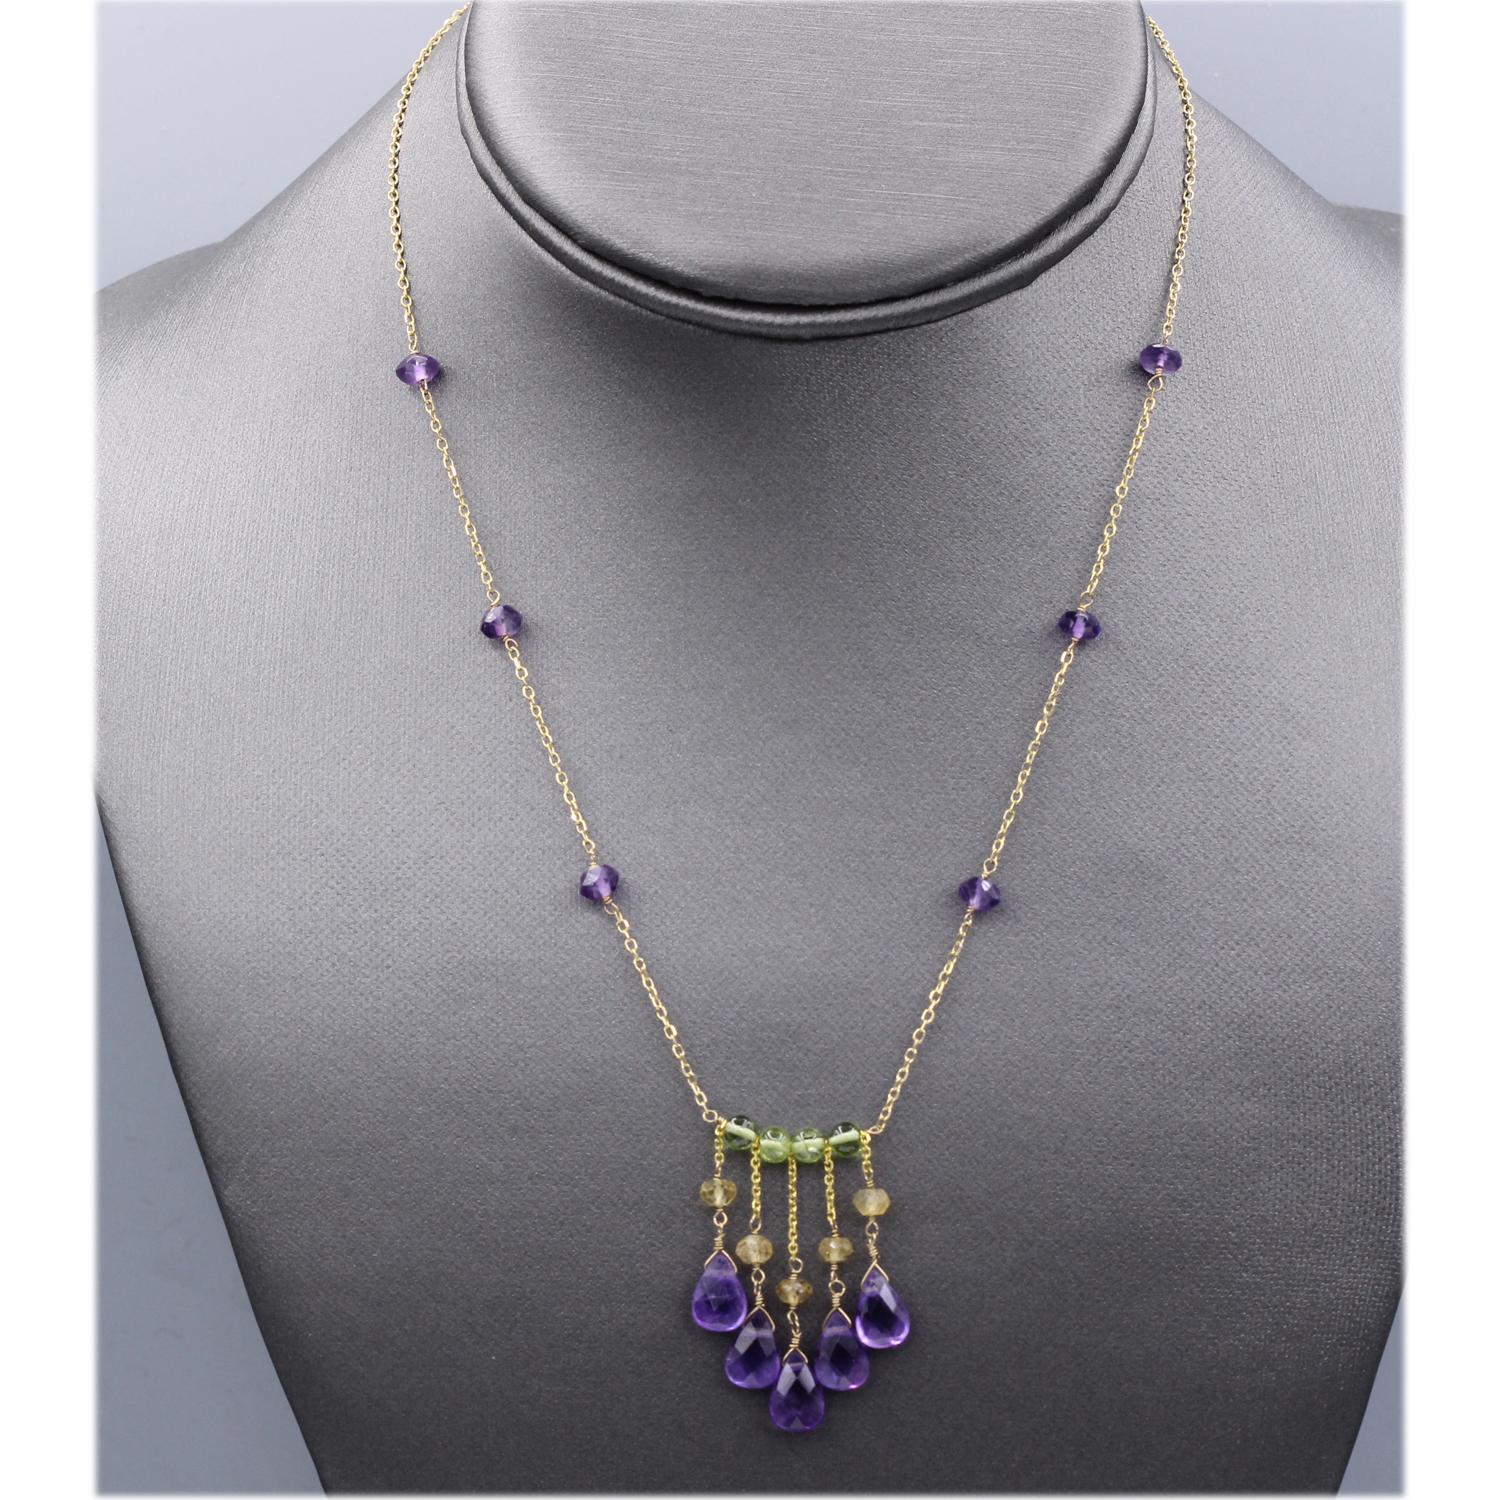 Briolette Cut Amethyst Necklace 14k Yellow Gold Dangle Bead Necklace For Sale